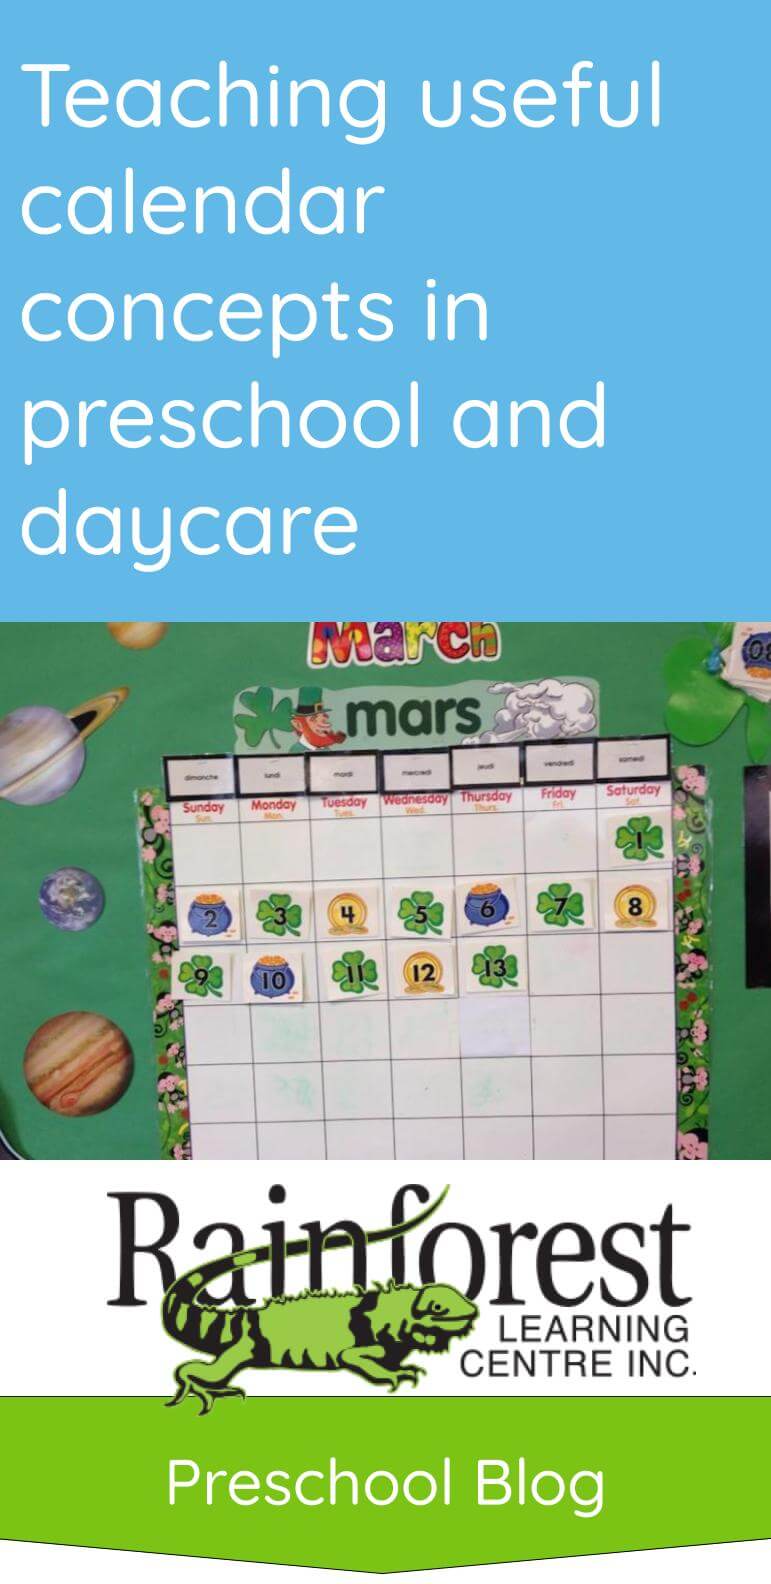 Teach useful calendar concepts in preschool and daycare - article Pinterest image